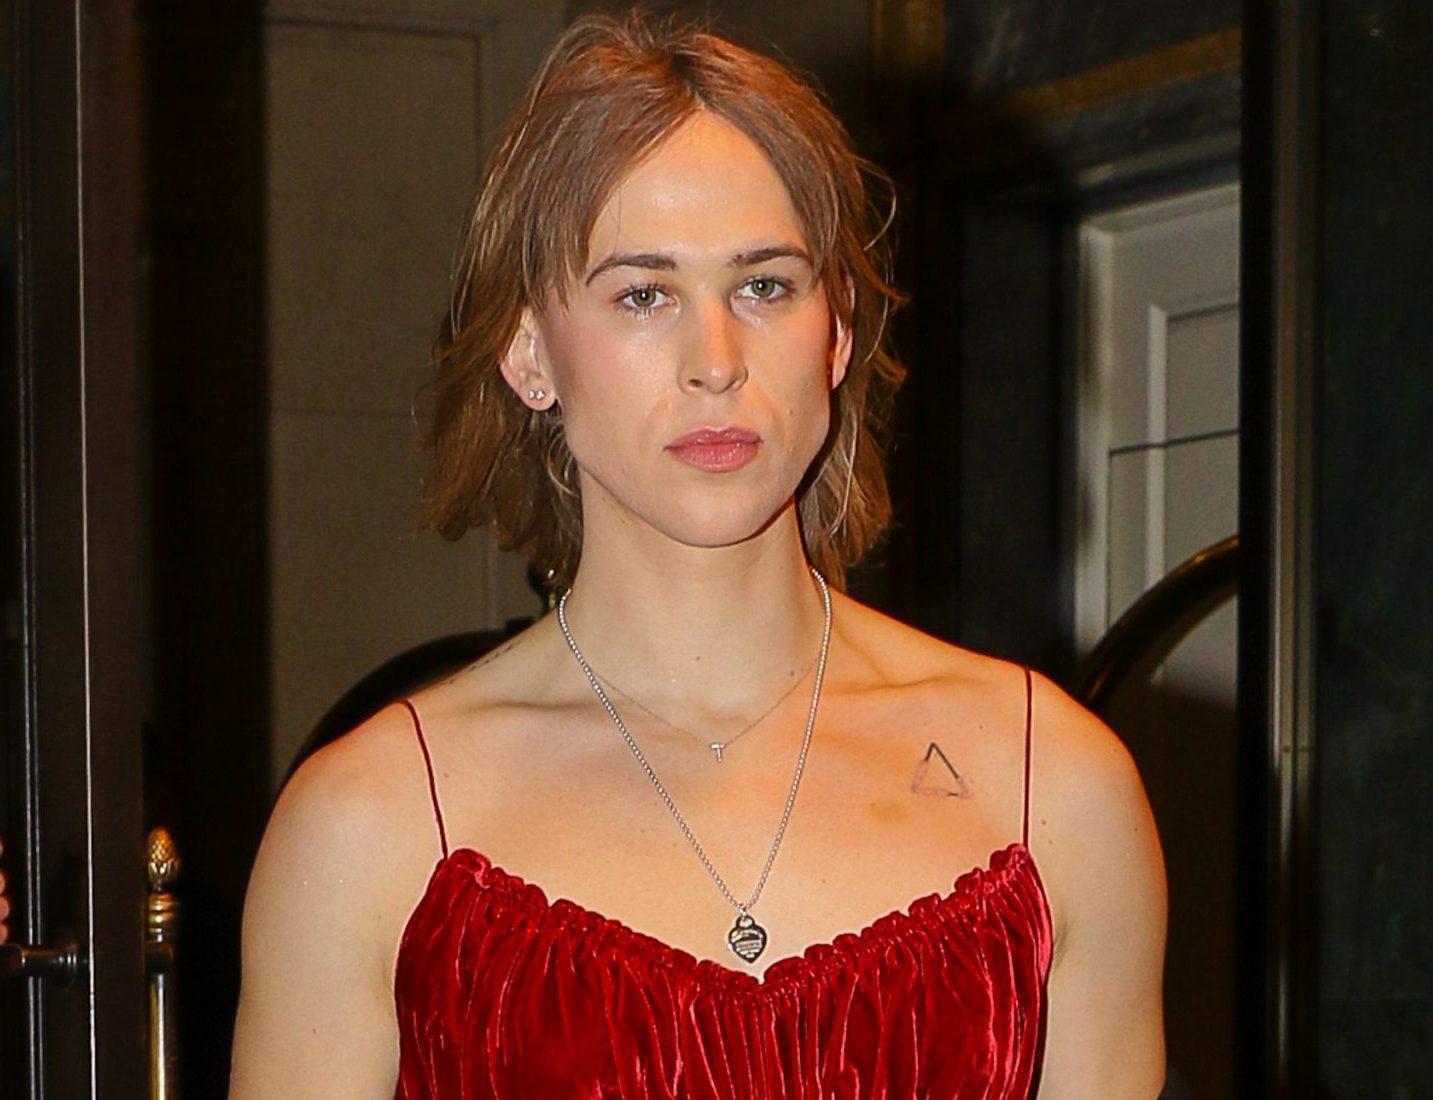 Tommy Dorfman looks radiant in a red velvet dress as leaving The Ritz-Carlton Hotel in NYC